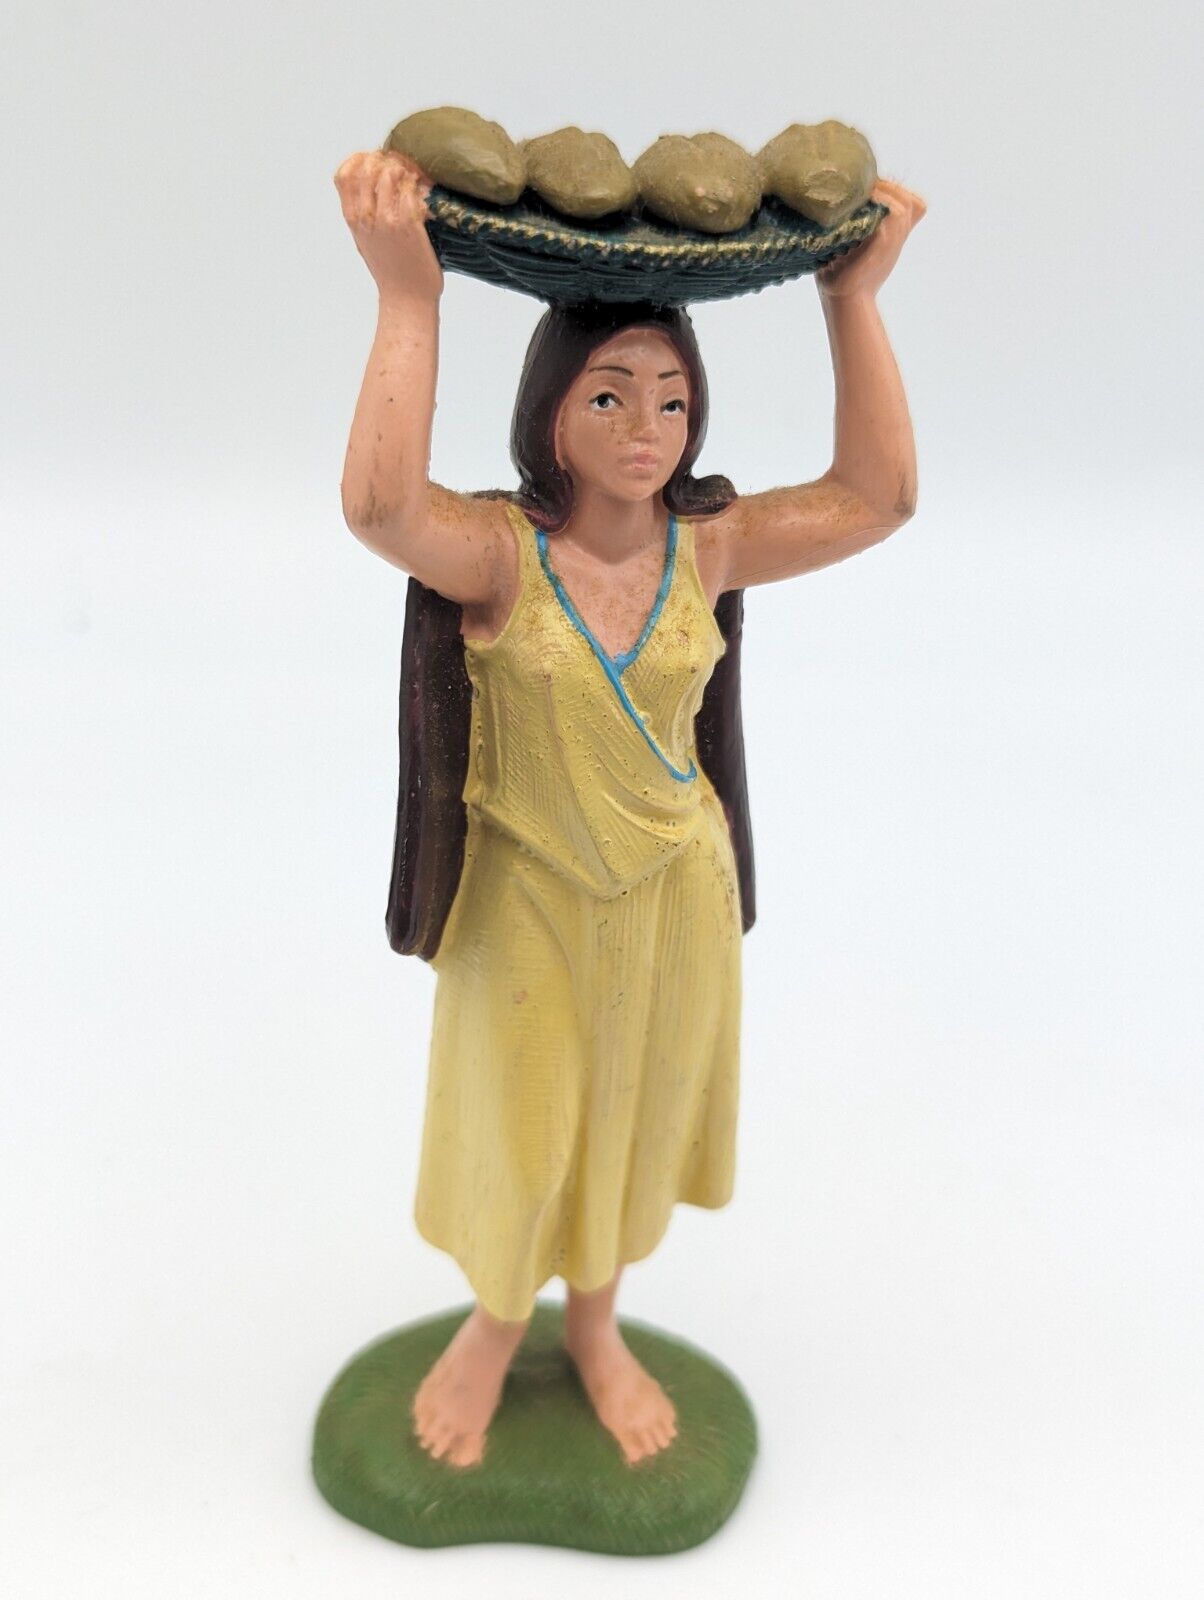 Fontanini Esther Bread Peddler made In Italy nativity figure #113